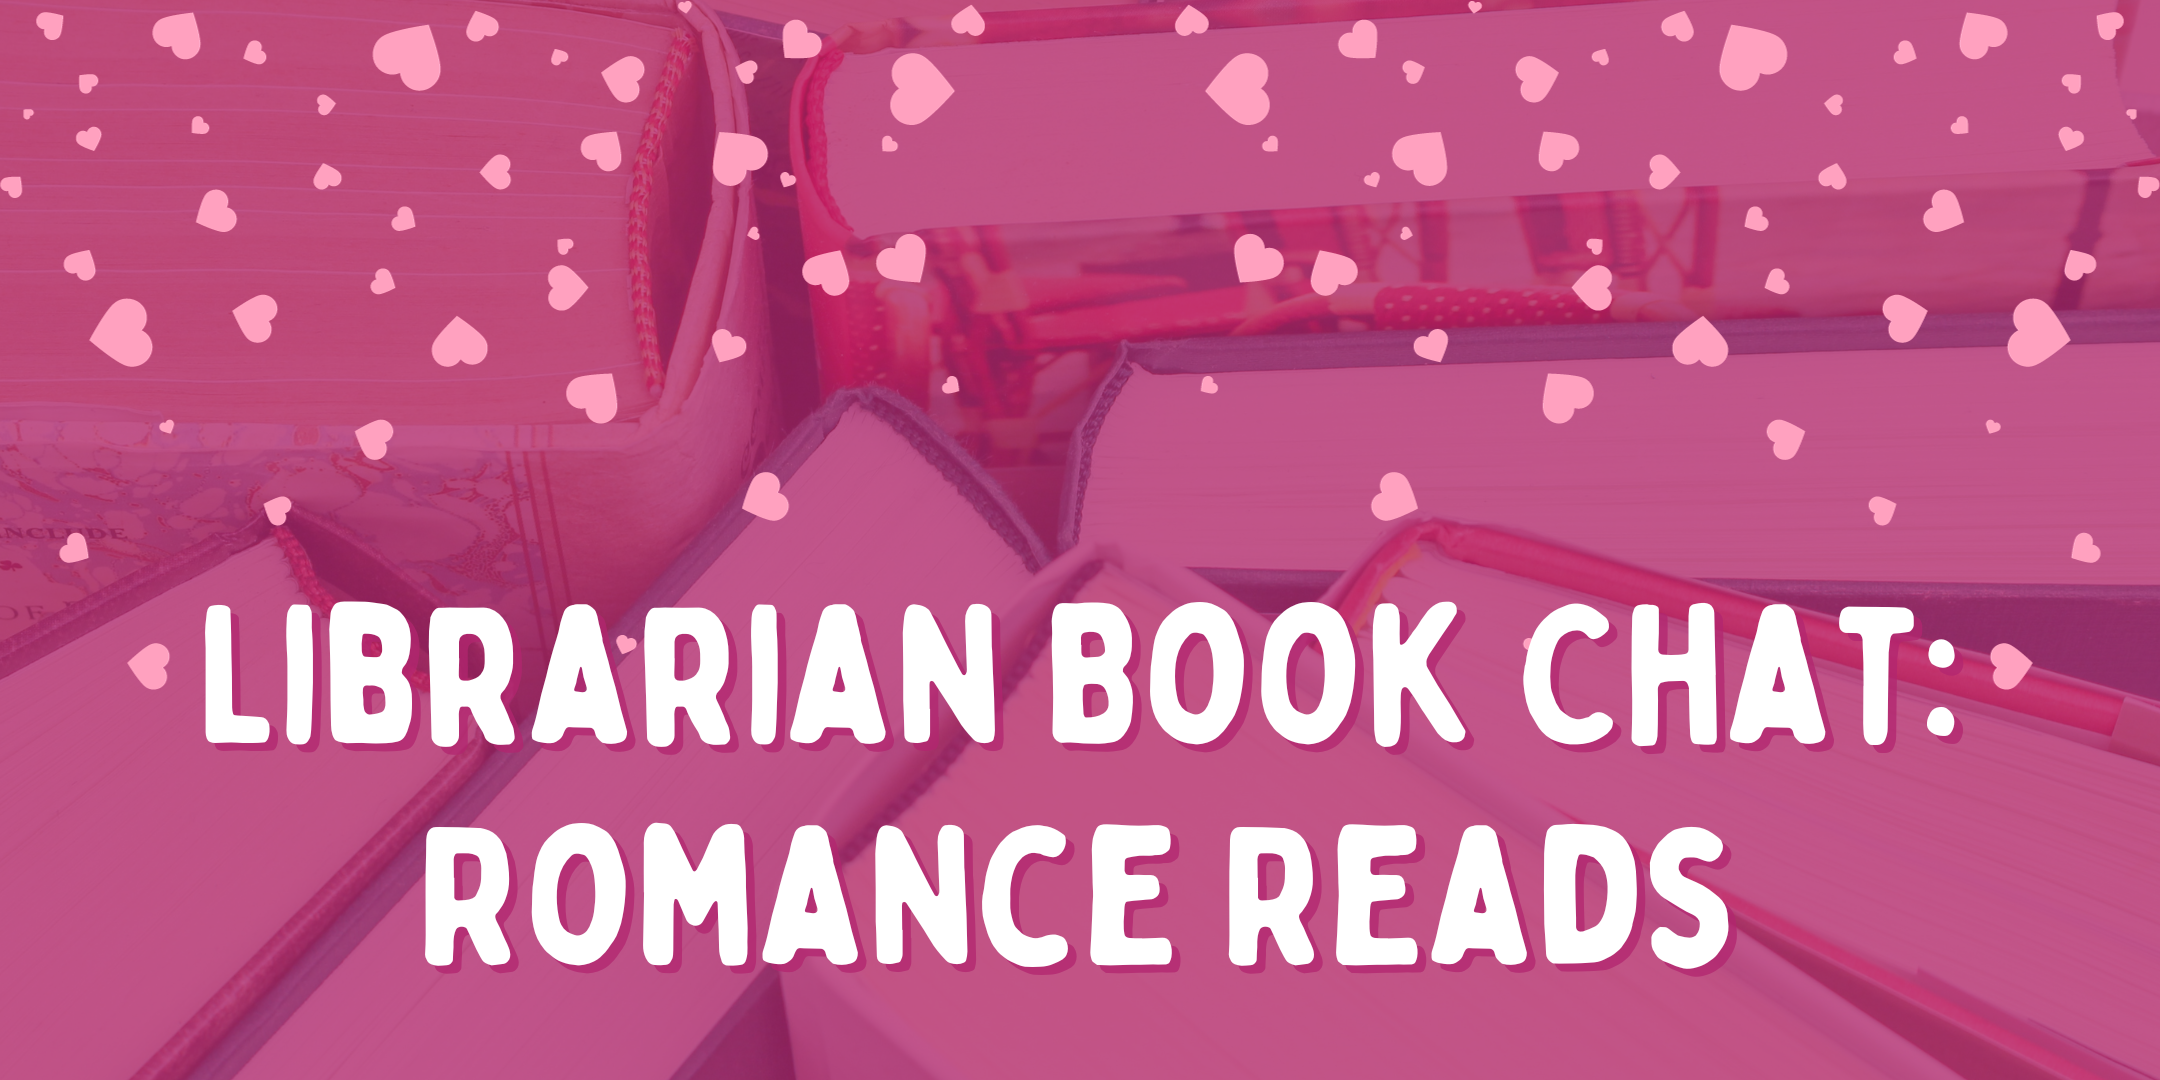 image of "Librarian Book Chat: Romance Reads"